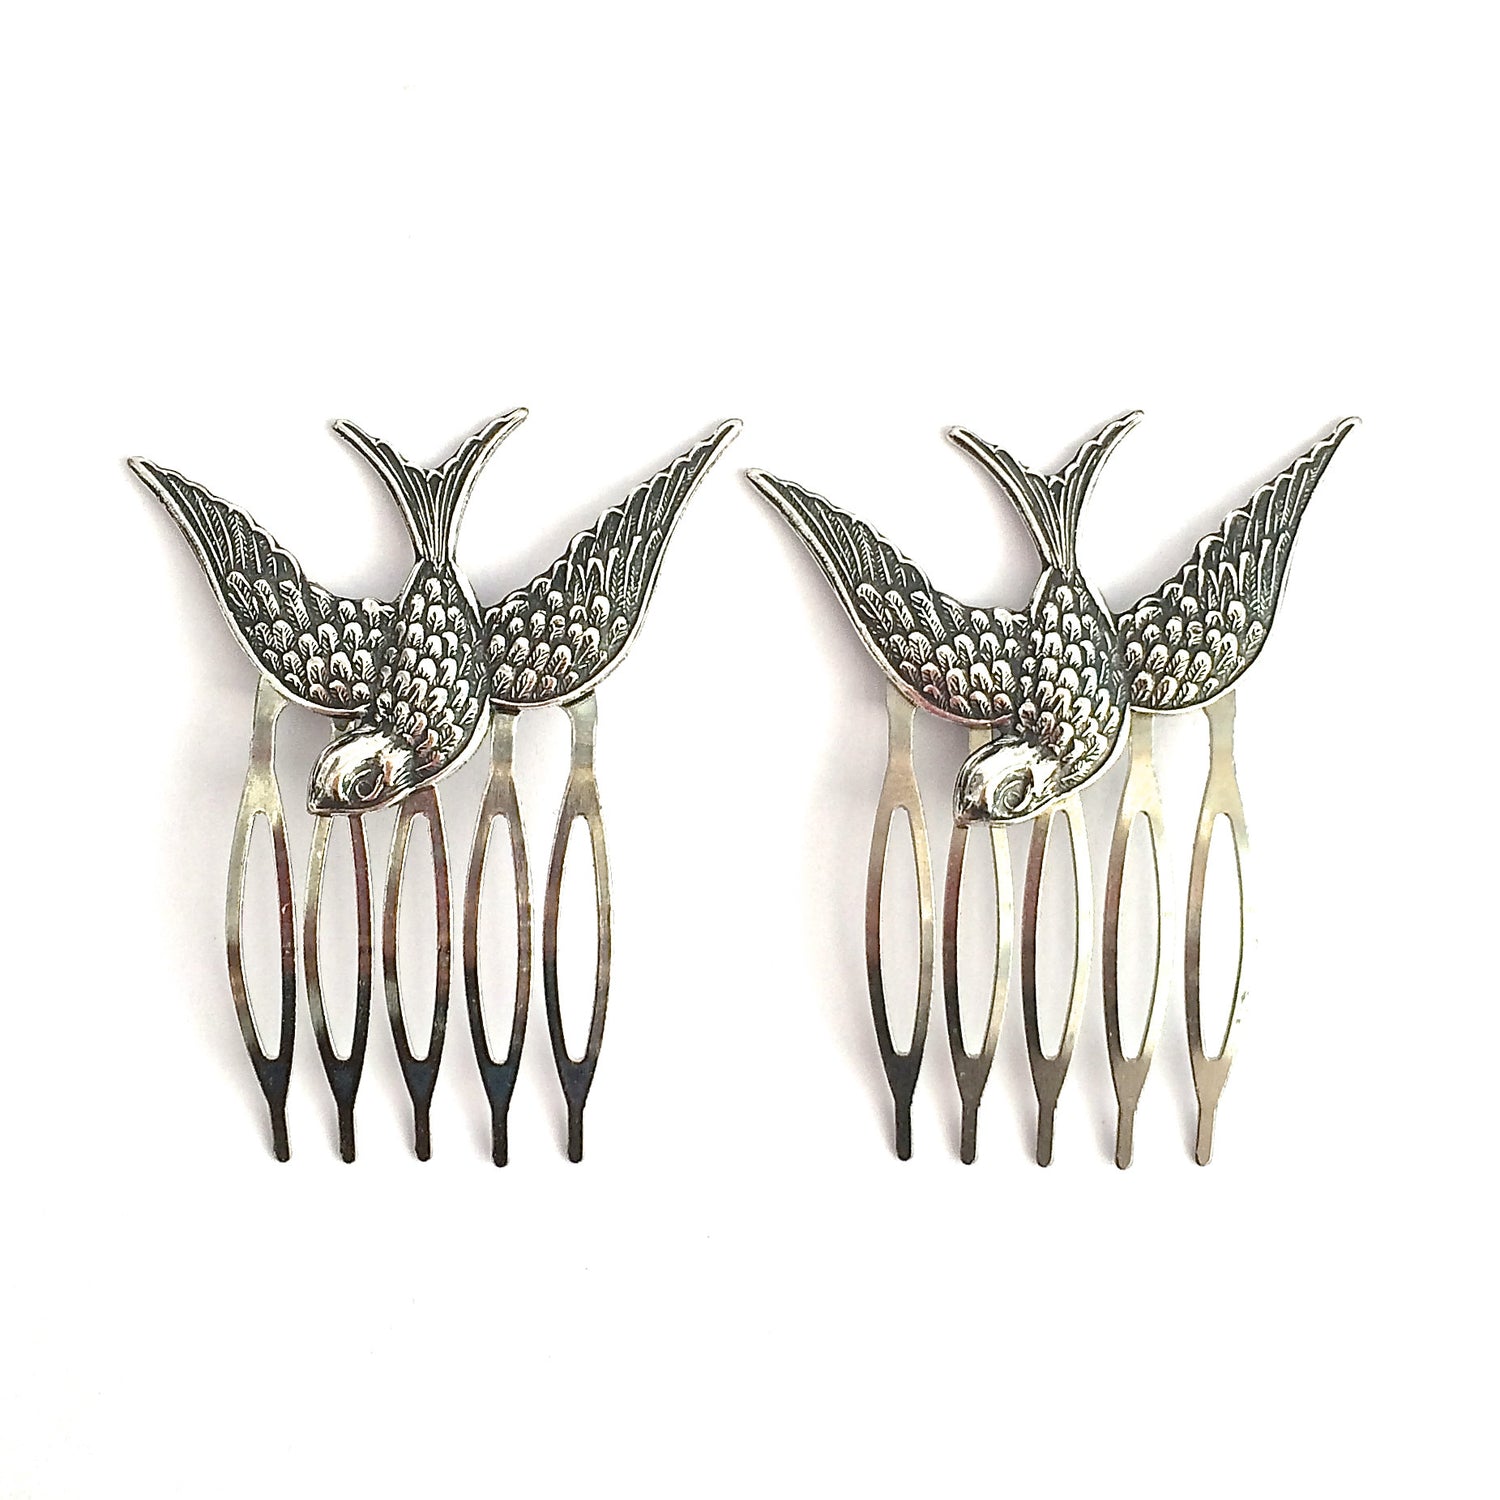 SILVER SWALLOW COMB